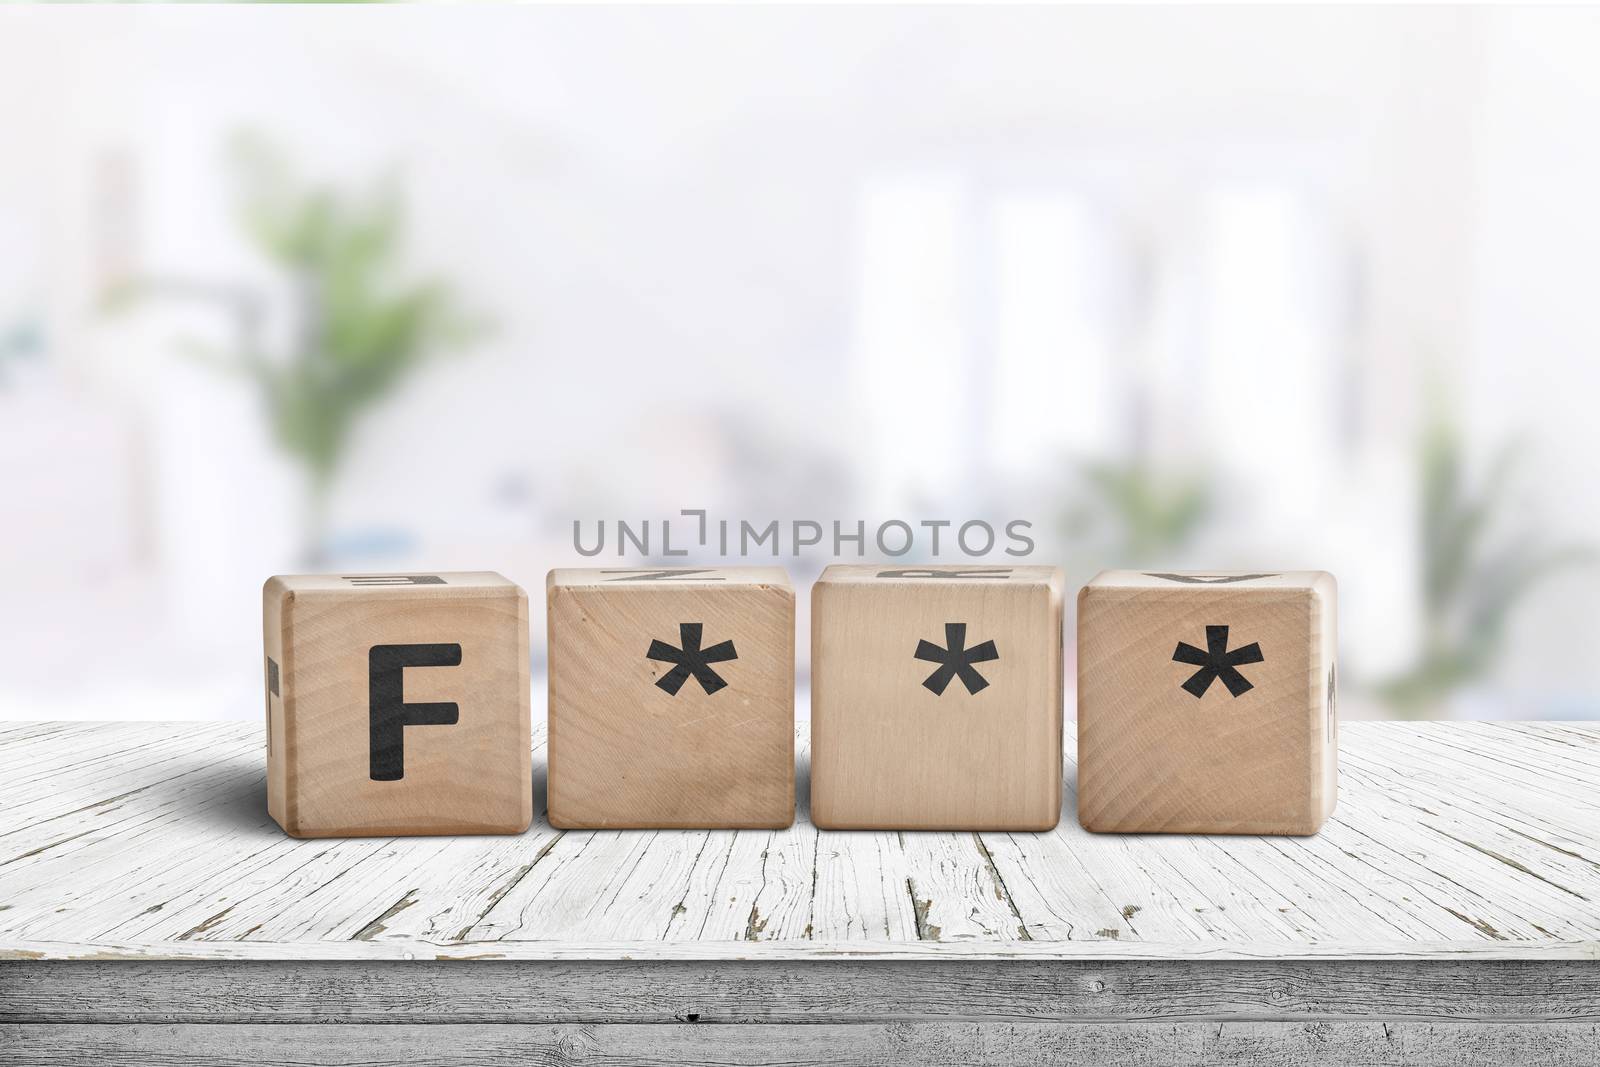 The F word censored on a wooden sign in a bright room on a plank desk